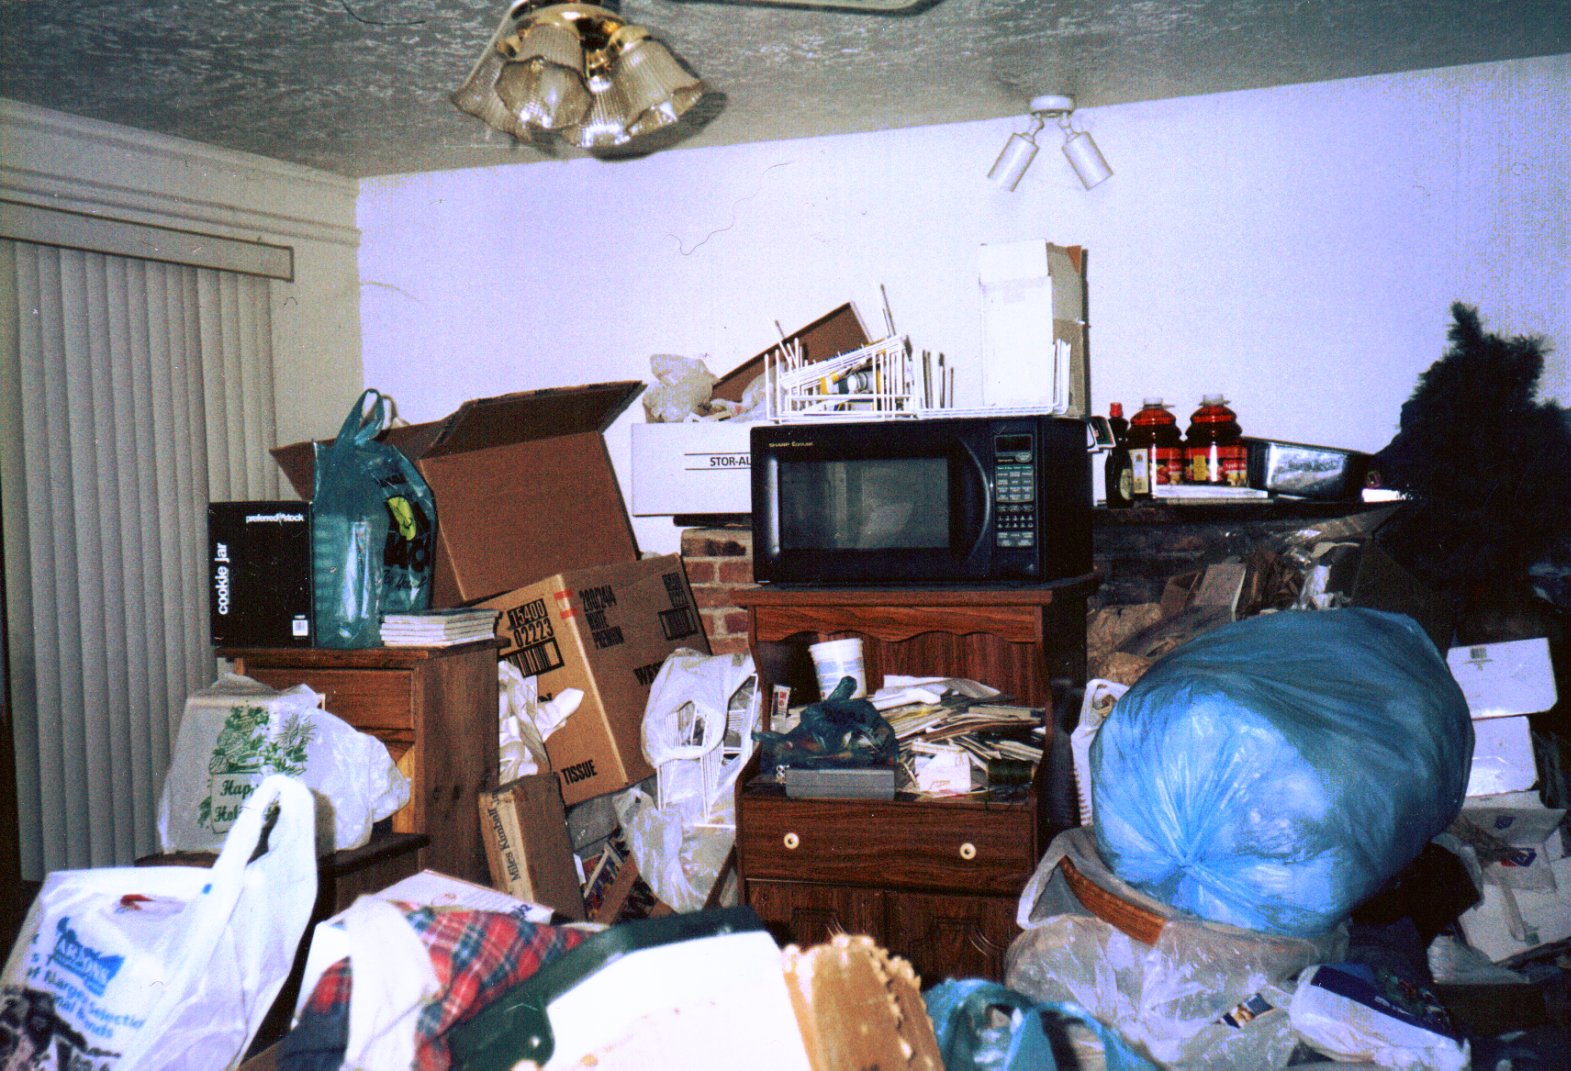 Coming Clean: Growing Up In A Hoarding Home